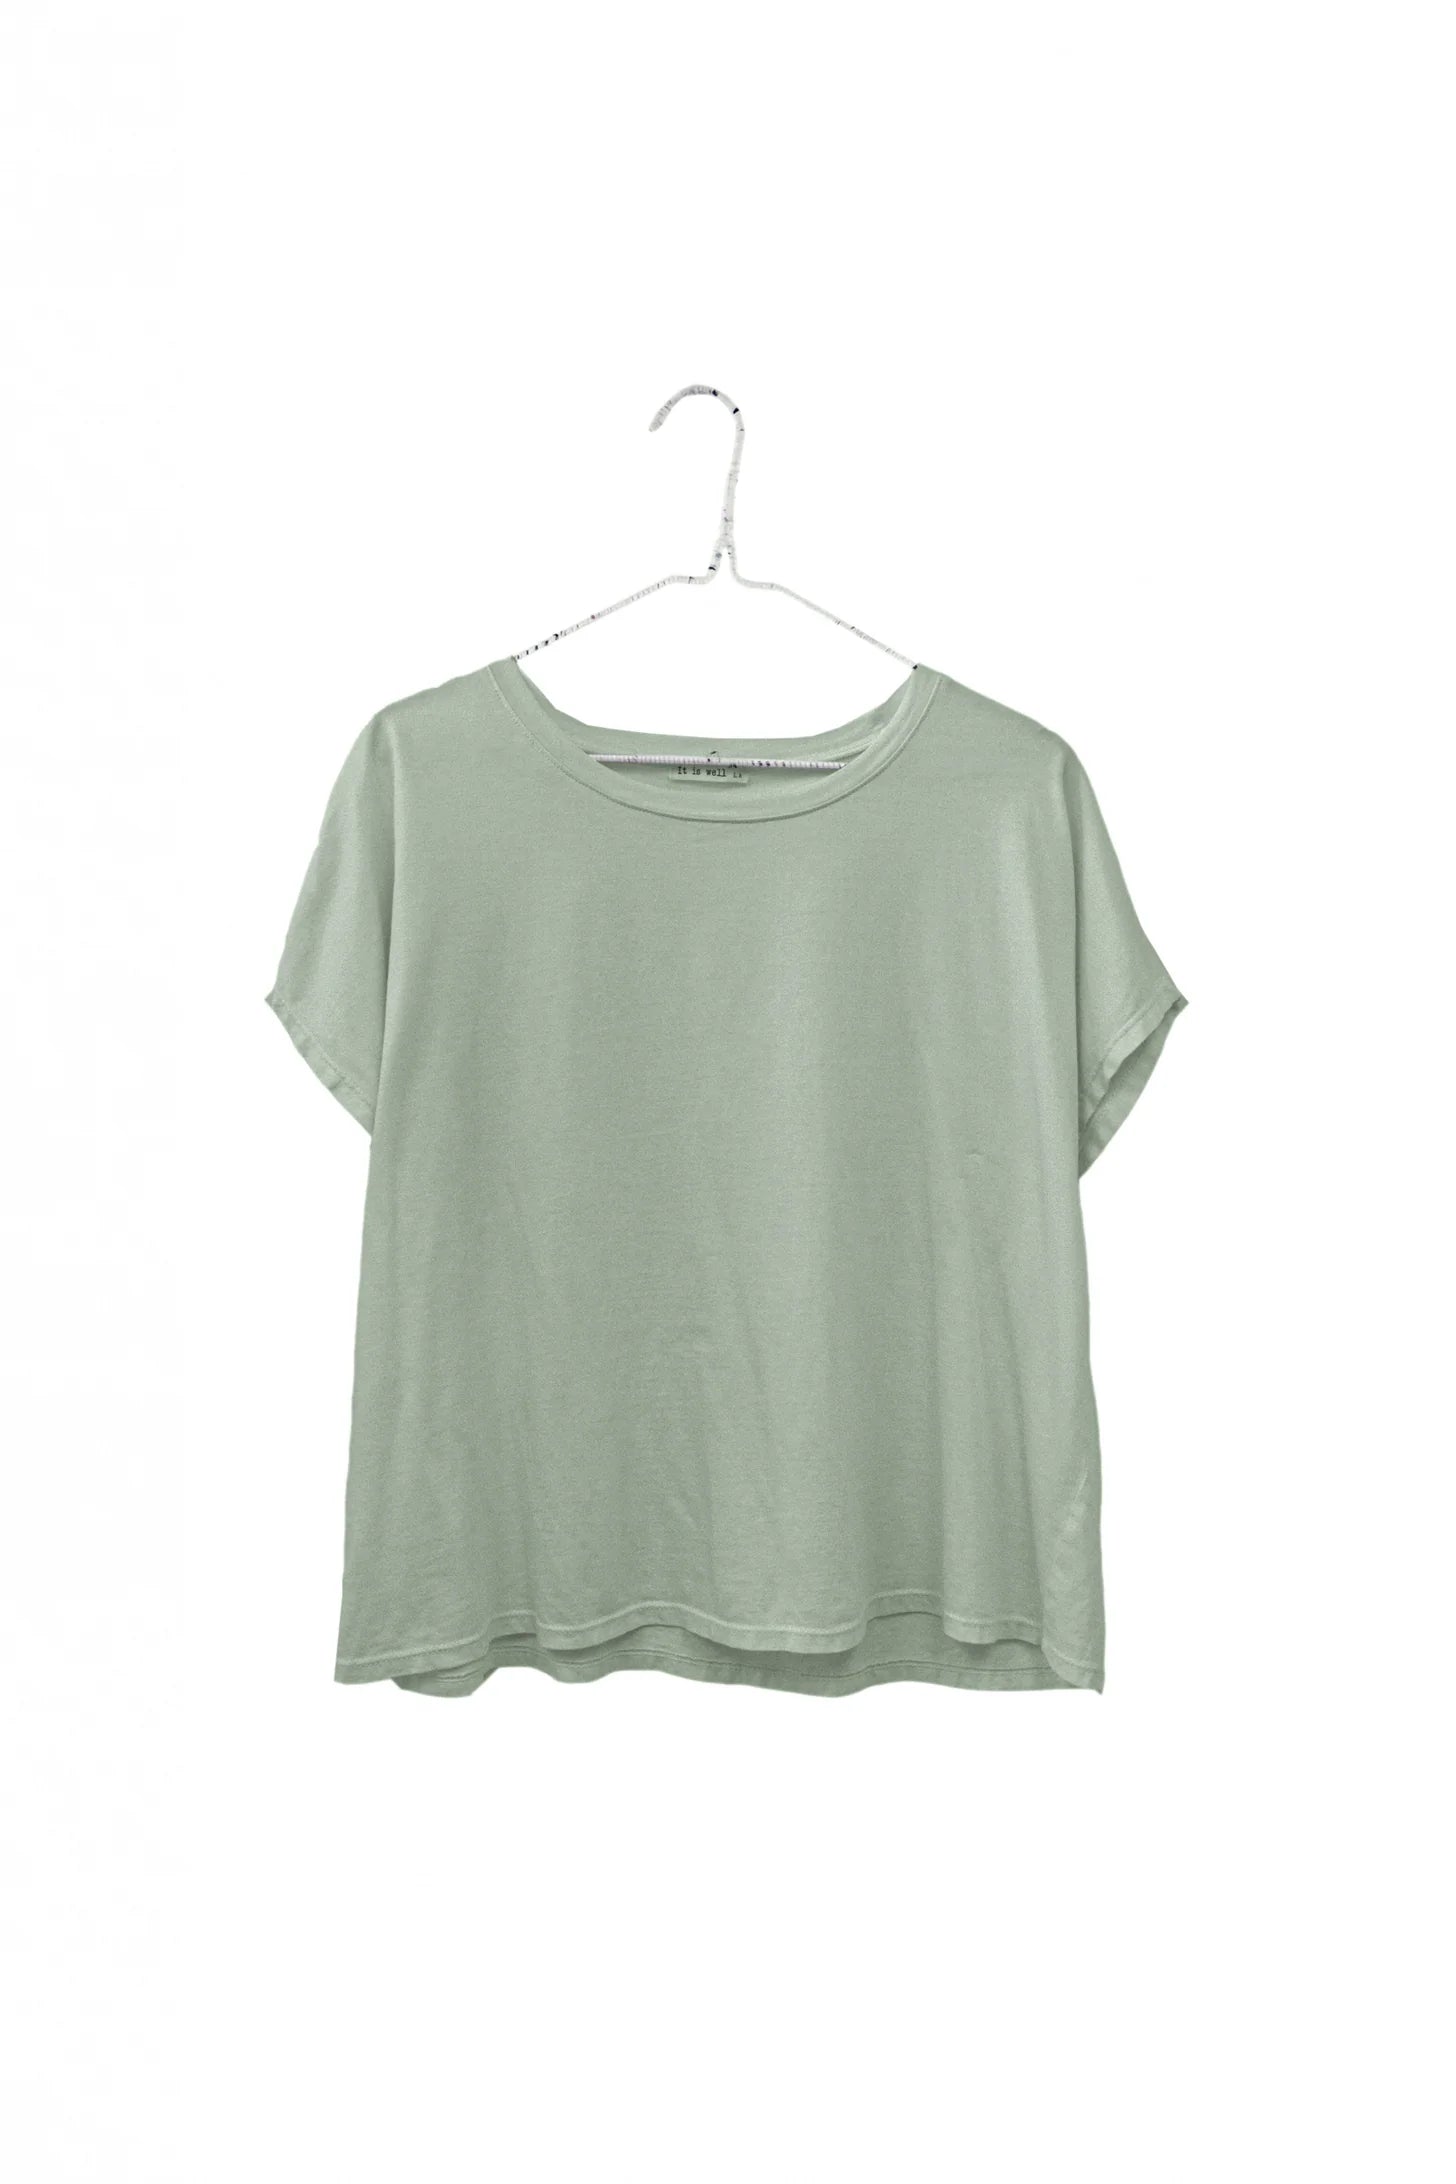 SS24 - It is Well L.A - Organic Crewneck Boxy Tee in Sage Green- front display 1